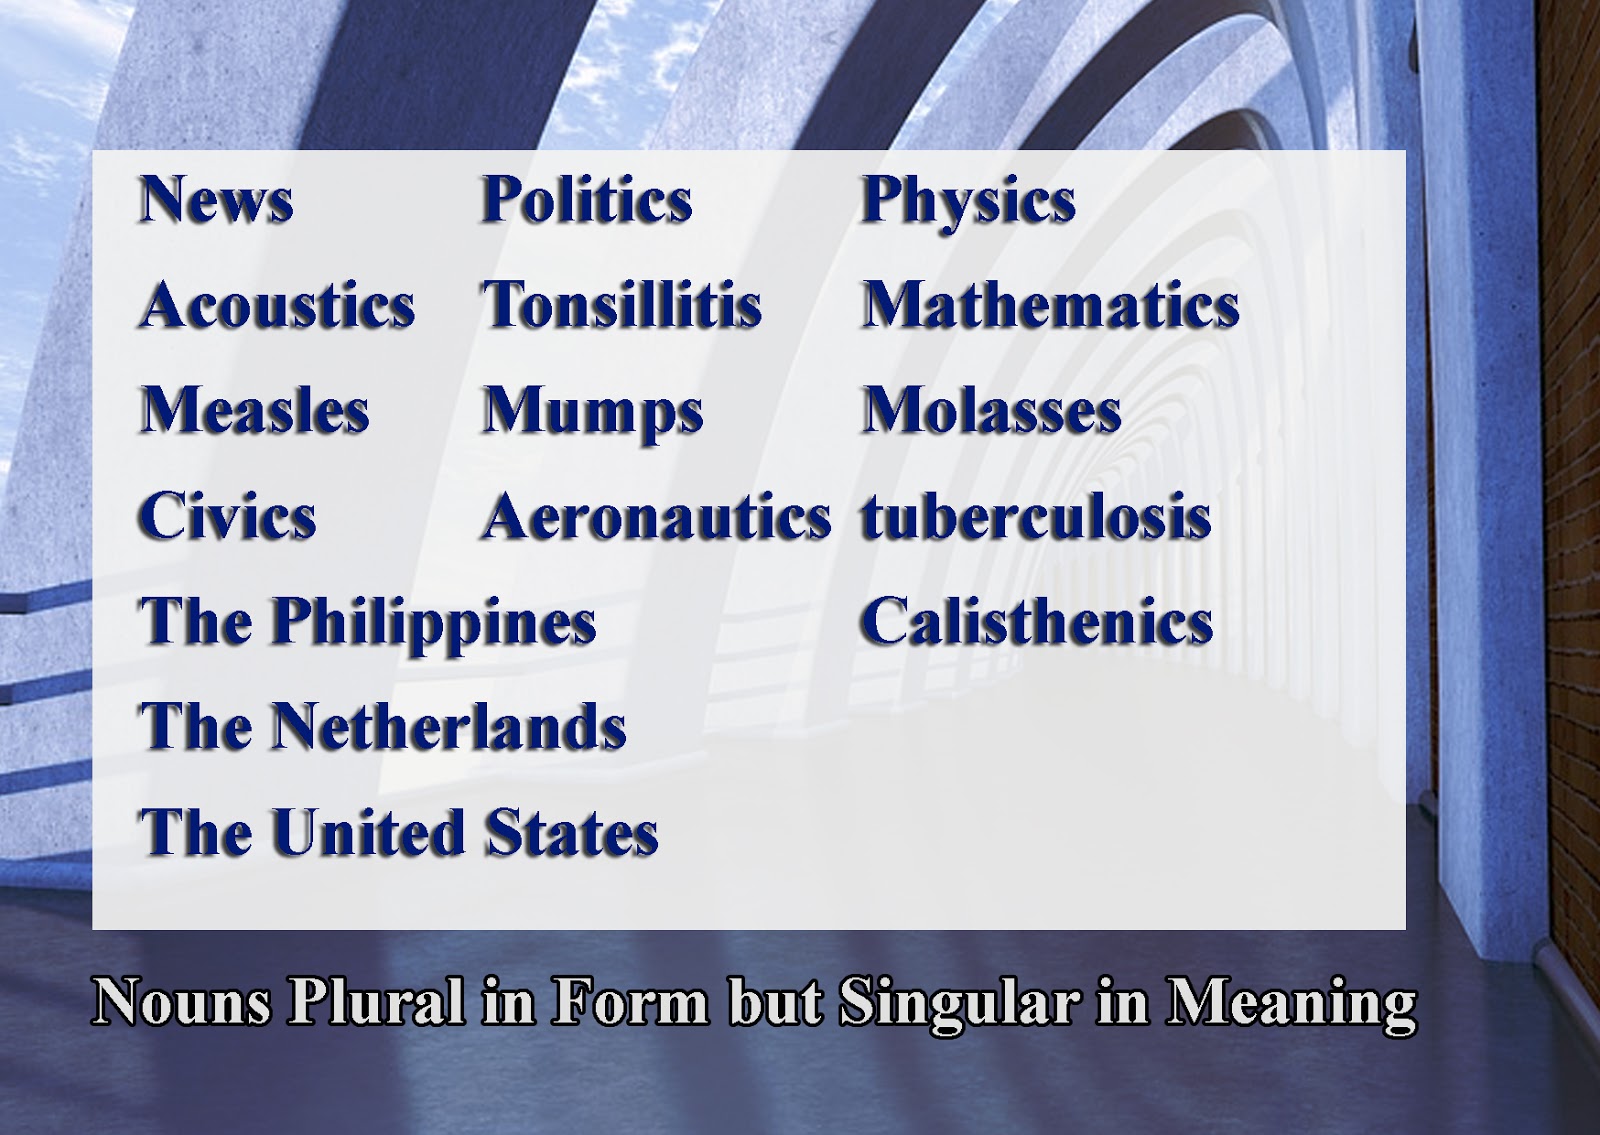 nouns-plural-in-form-but-singular-in-meaning-10-examples-kalimat-blog